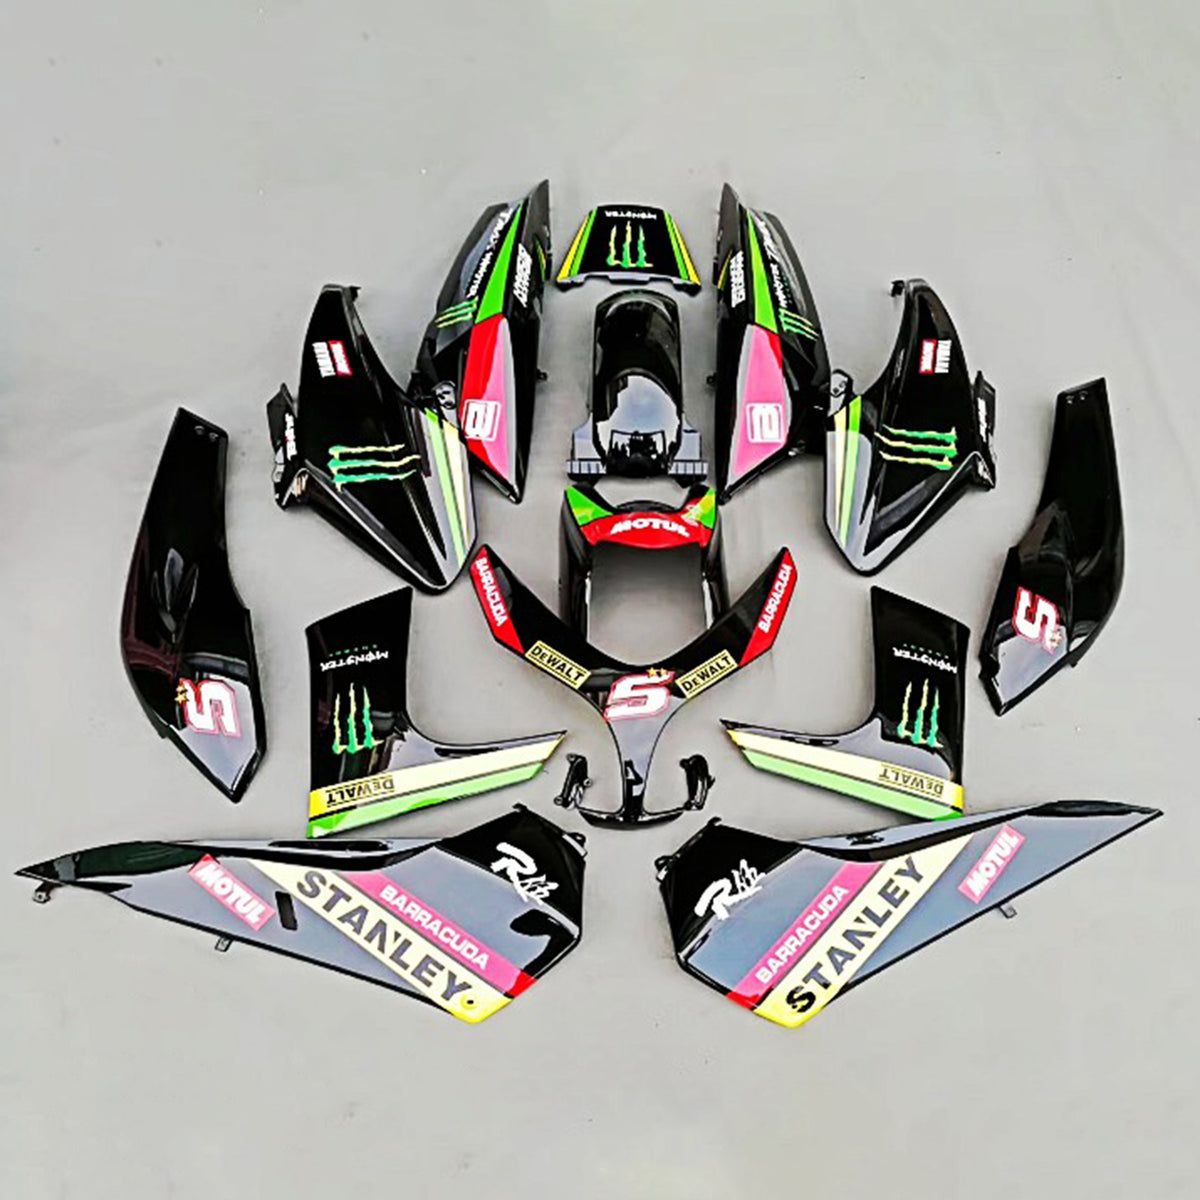 Amotopart 2019-2021 Yamaha TMAX560 Fairing Red&Green Accents Kit